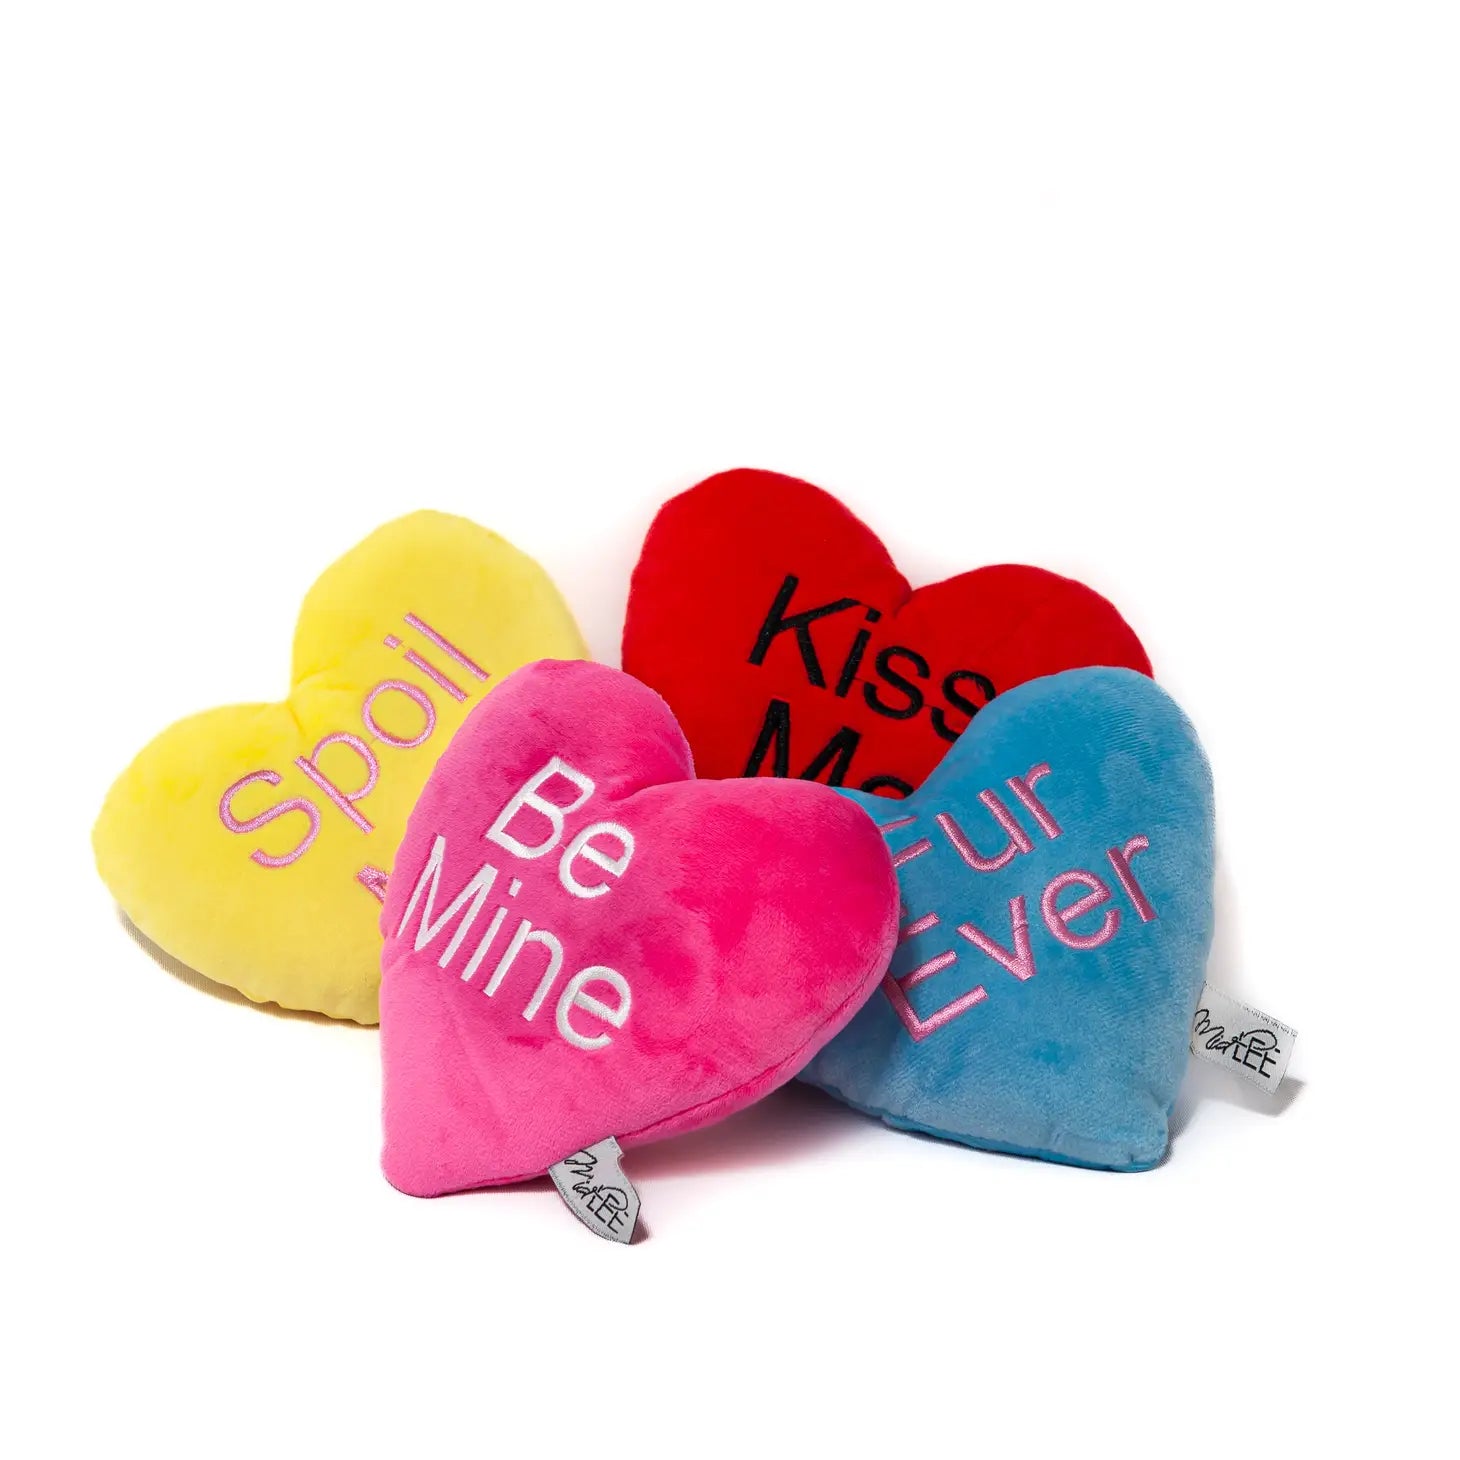 Midlee - Candy Heart Valentine Toy